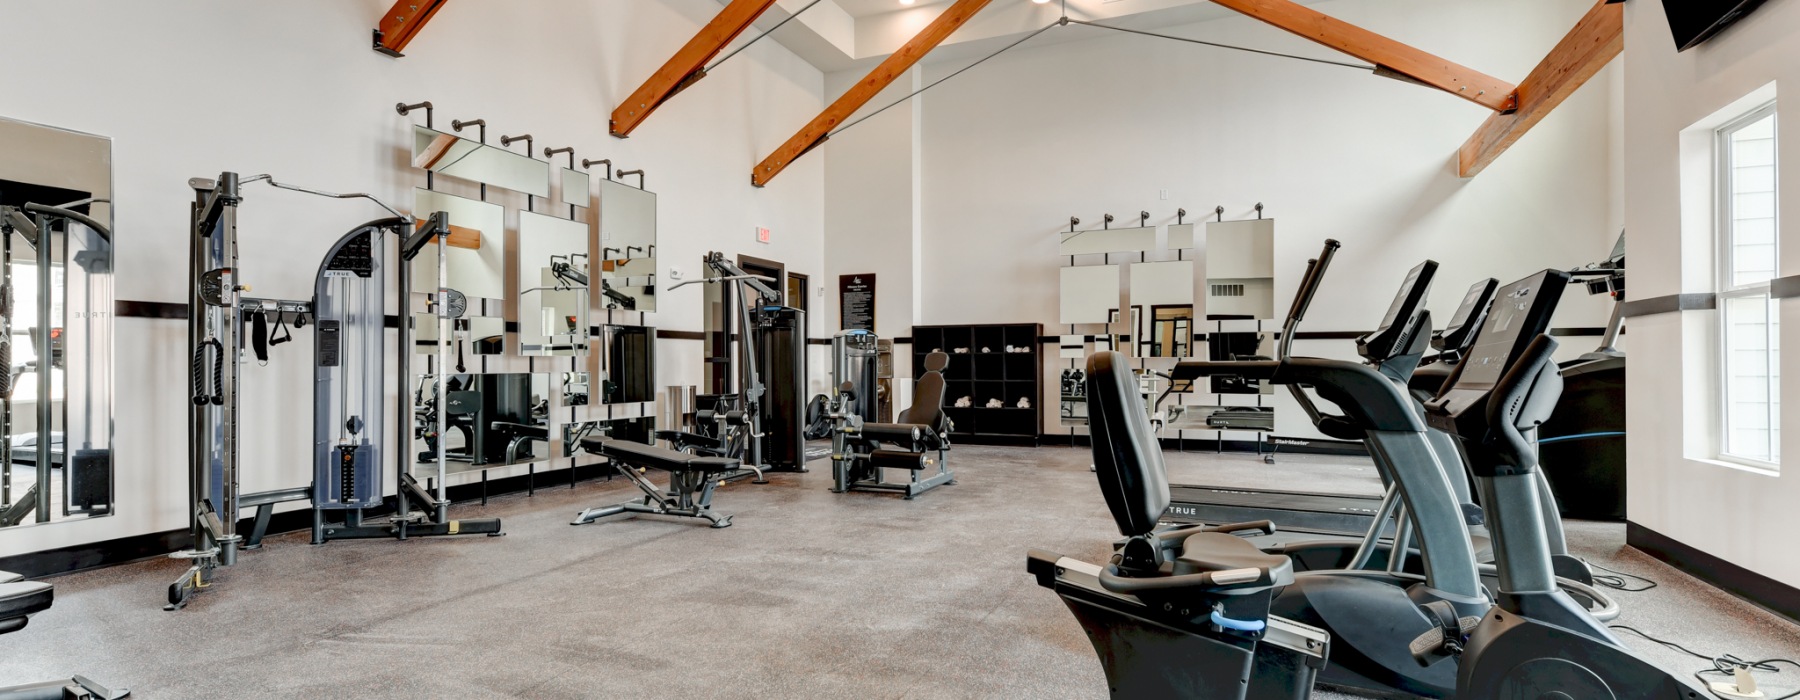 Two Story Fitness Center